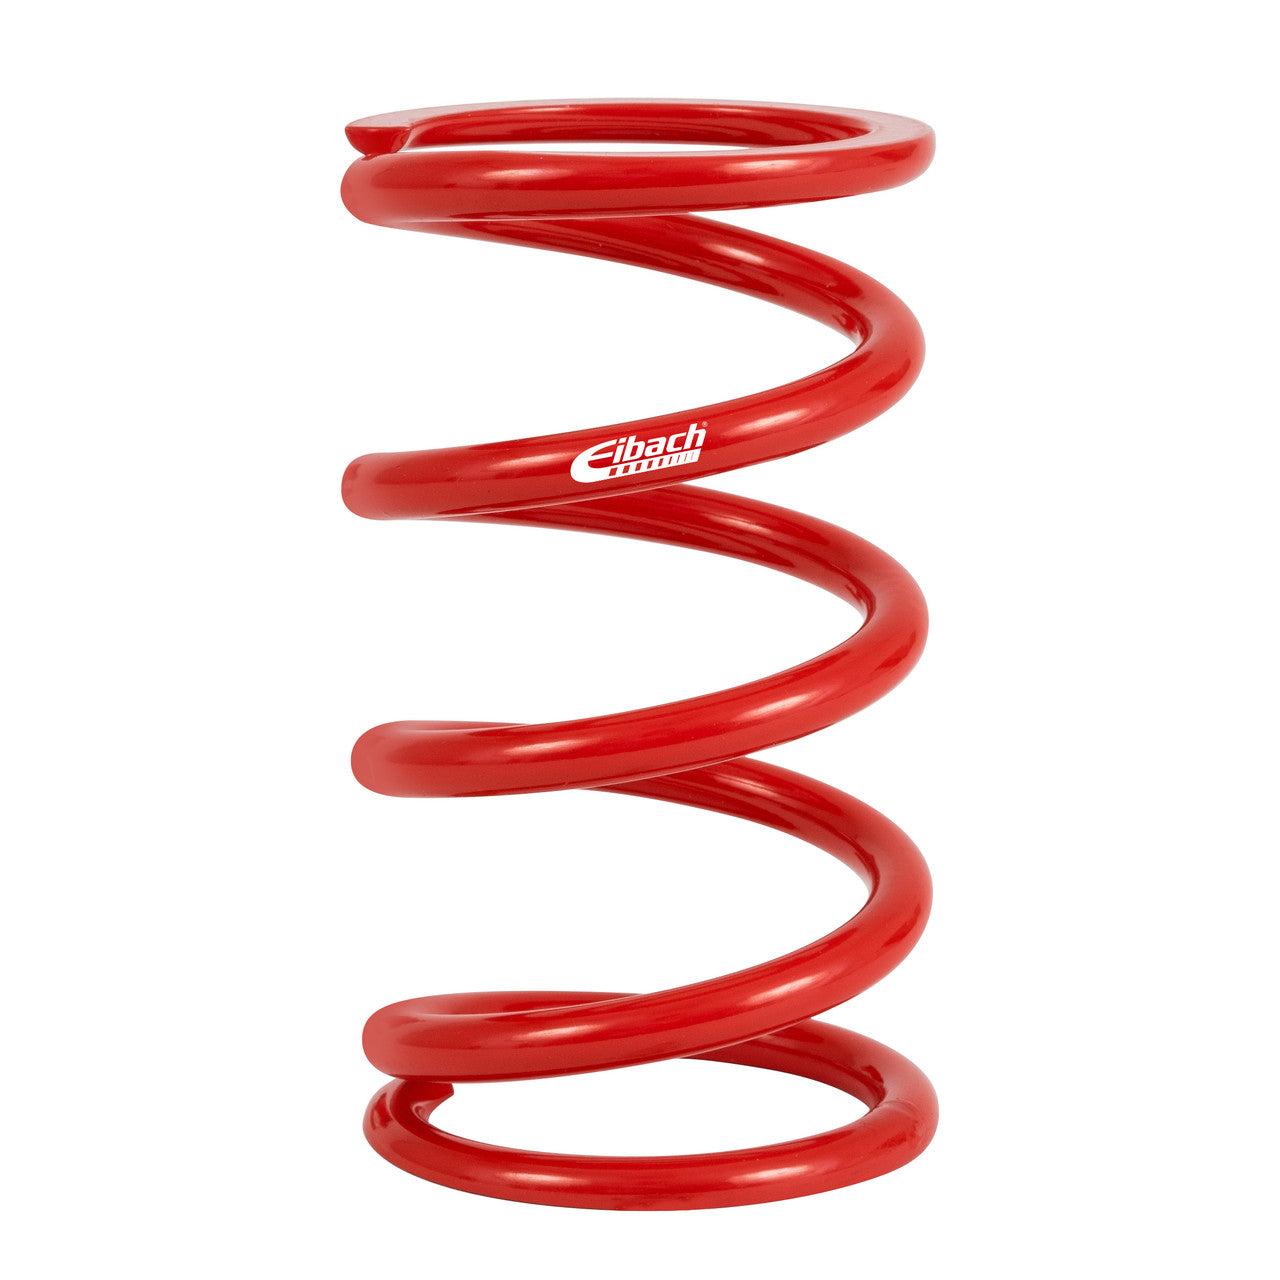 Eibach Metric Coilover Spring - 65MM I.D. 180-065-T090